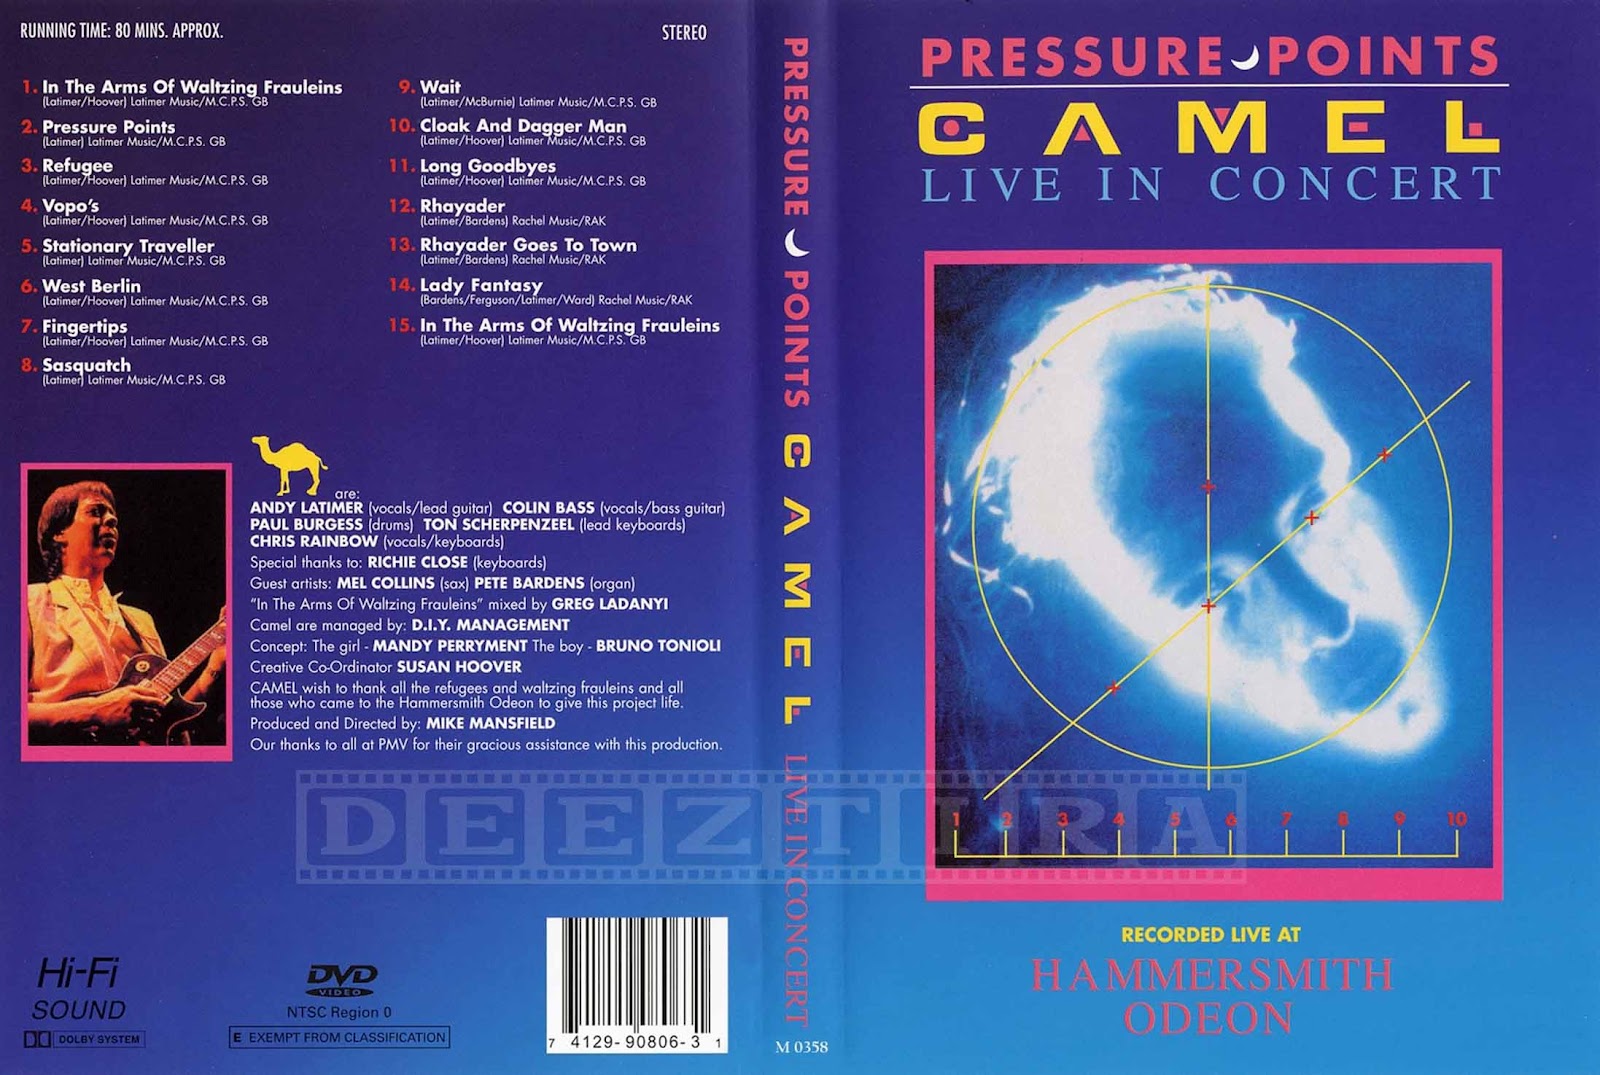 YOUDISCOLL: Camel - Pressure Points Live in Concert 19841600 x 1075